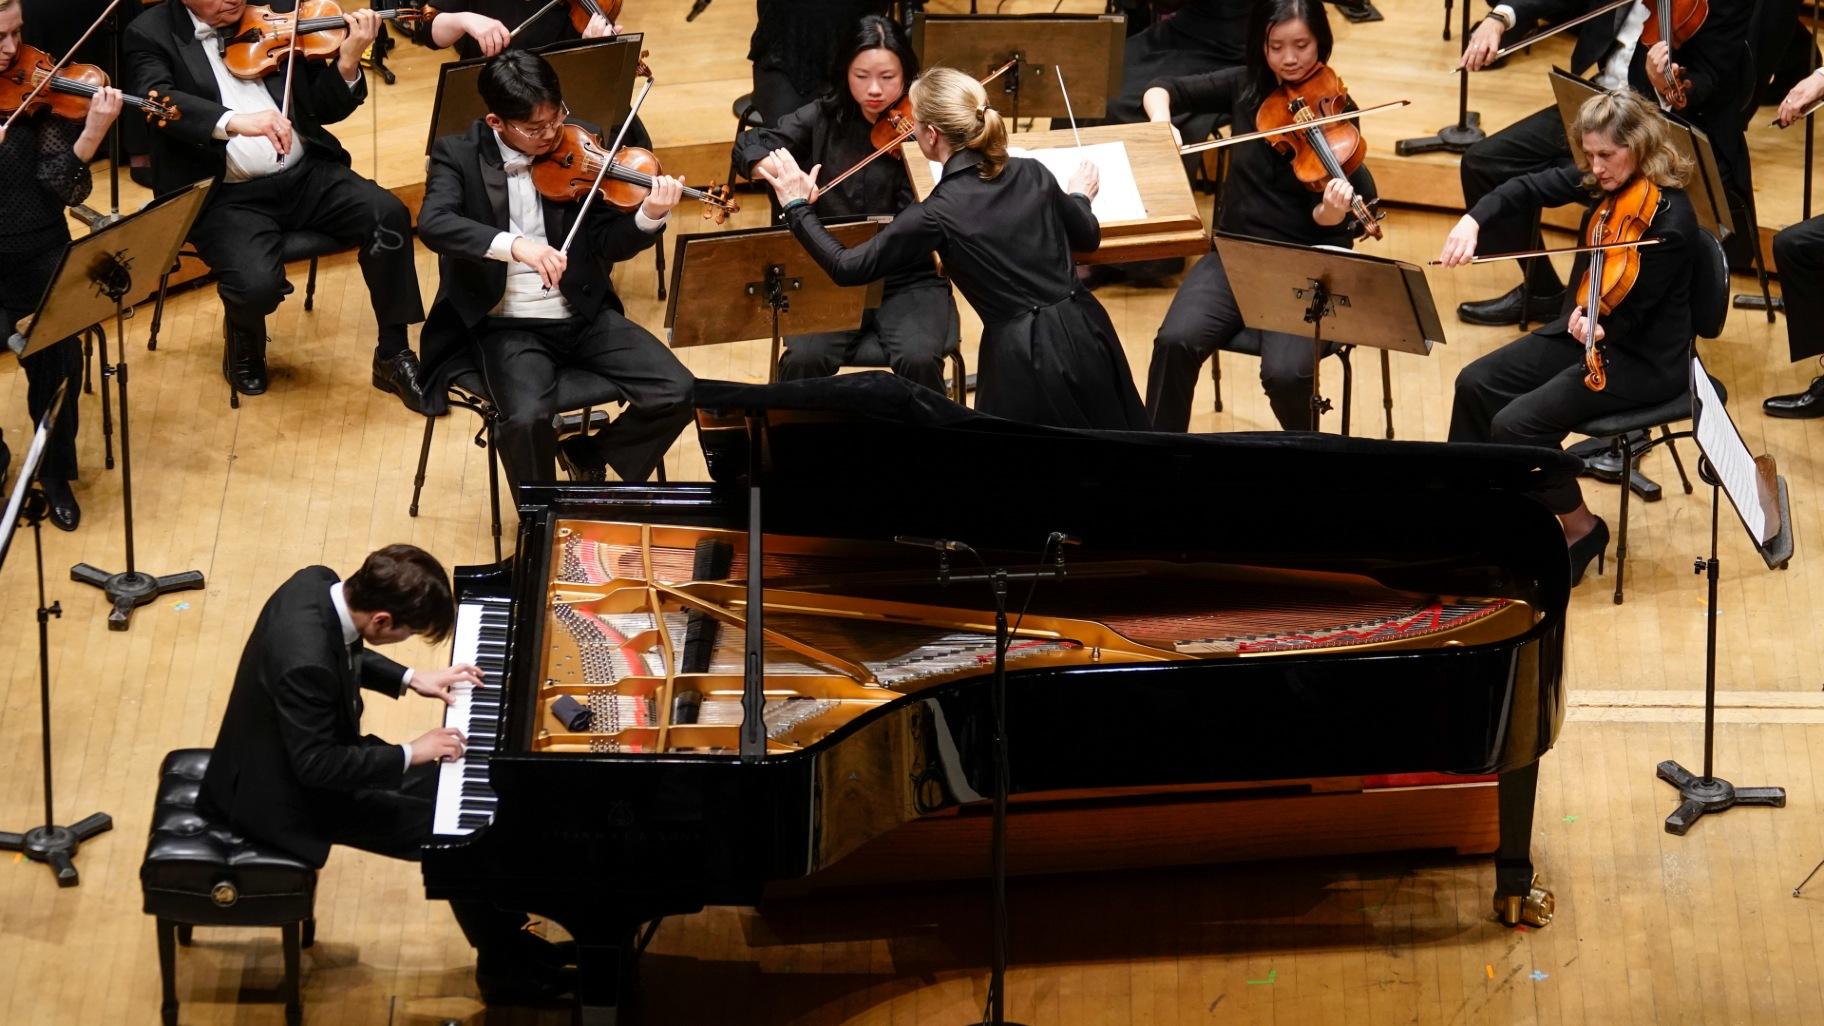 Seong-Jin Cho and conductor Gemma New make their CSO debuts in a performance of Beethoven’s “Piano Concerto No. 3” with the Chicago Symphony Orchestra. (Nuccio DiNuzzo)